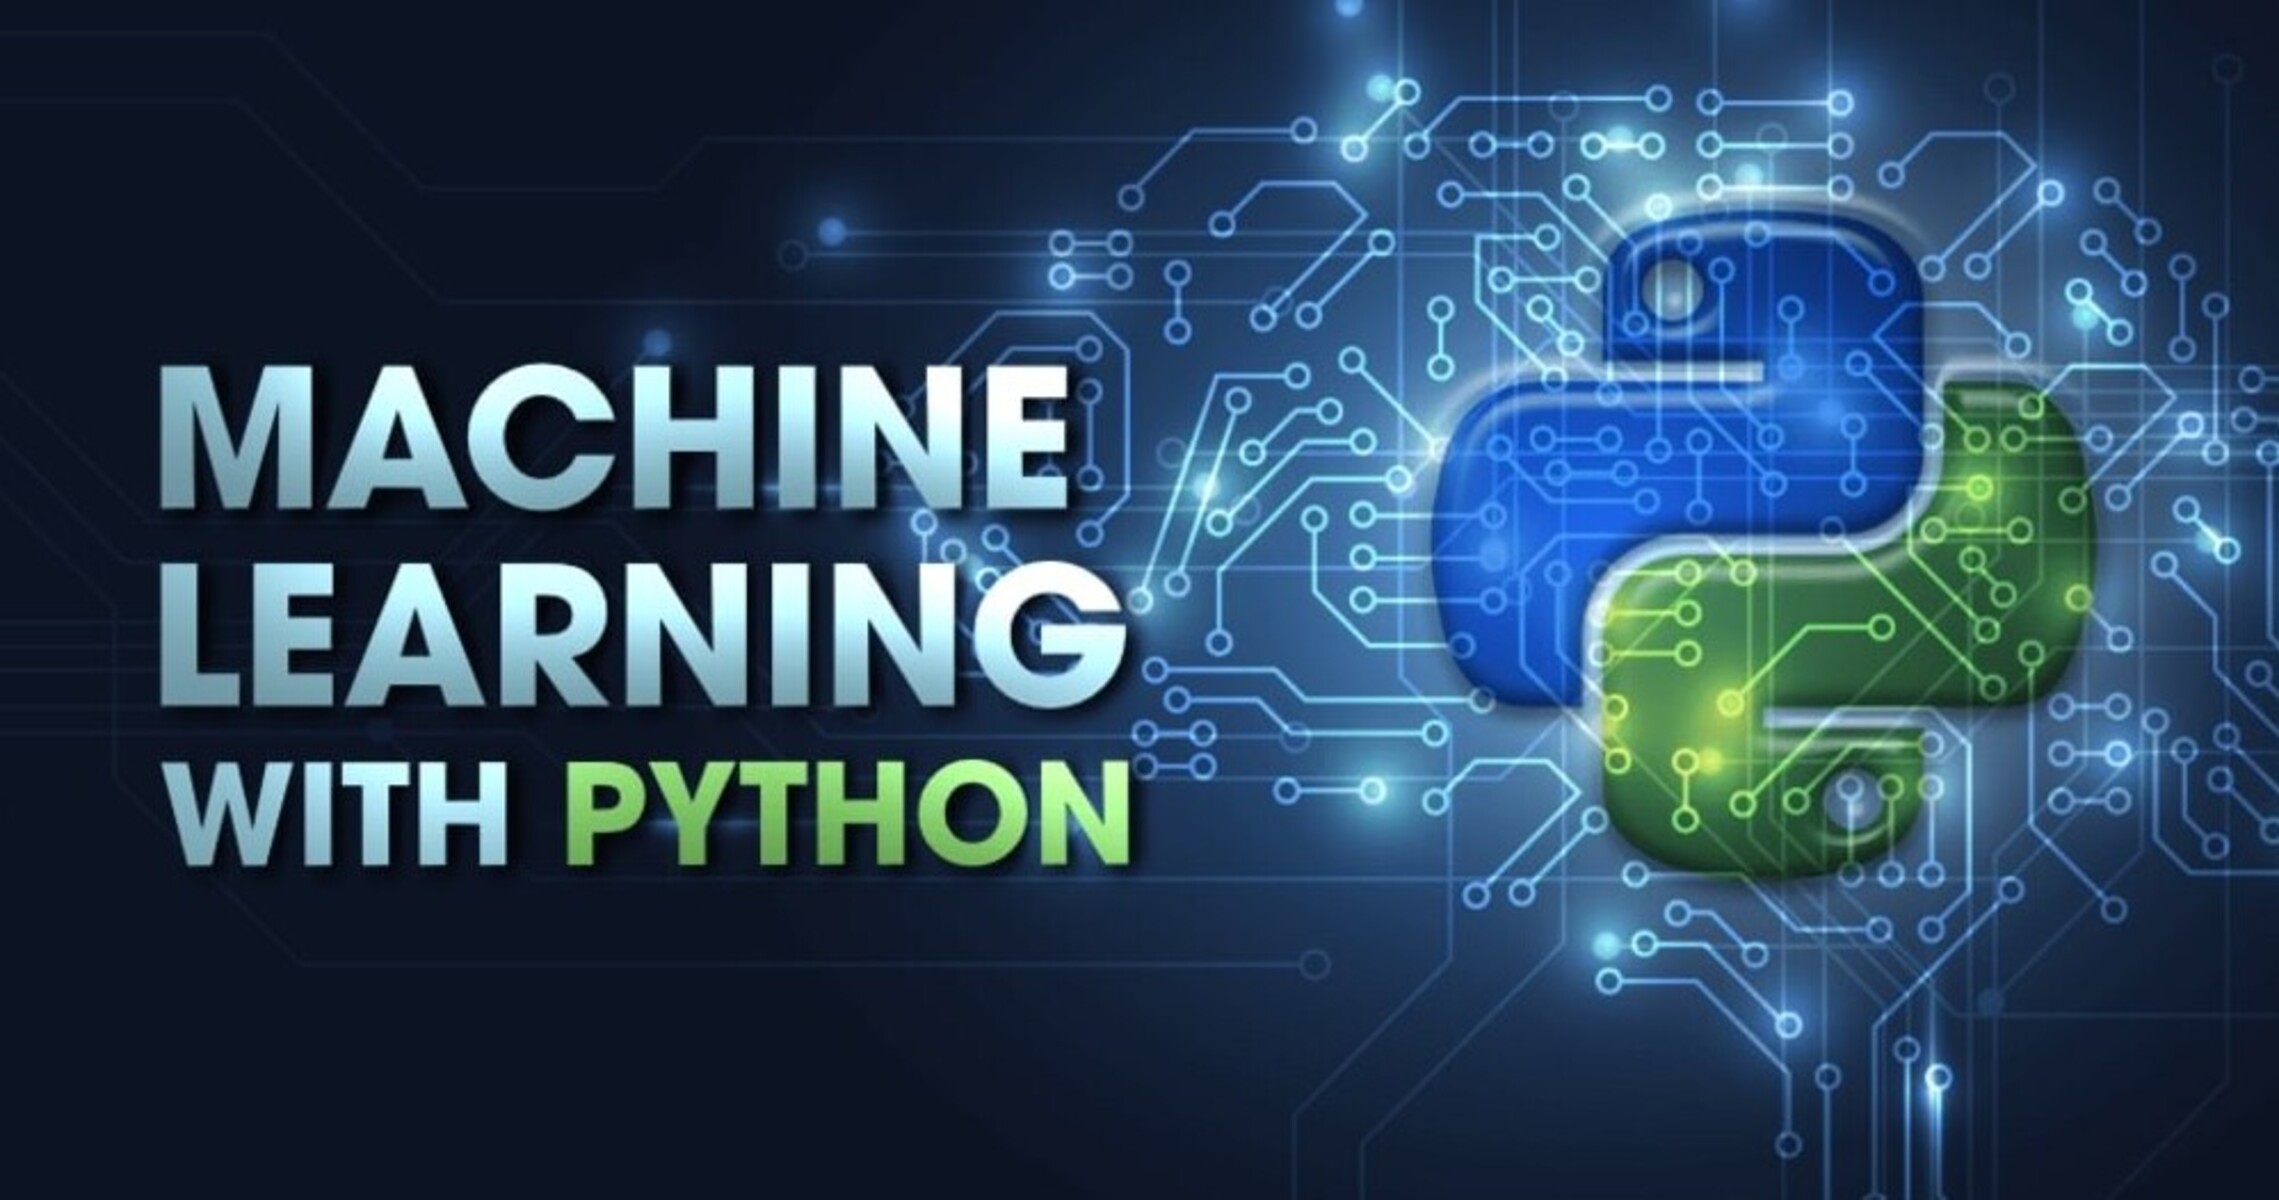 How Long To Learn Machine Learning With Python